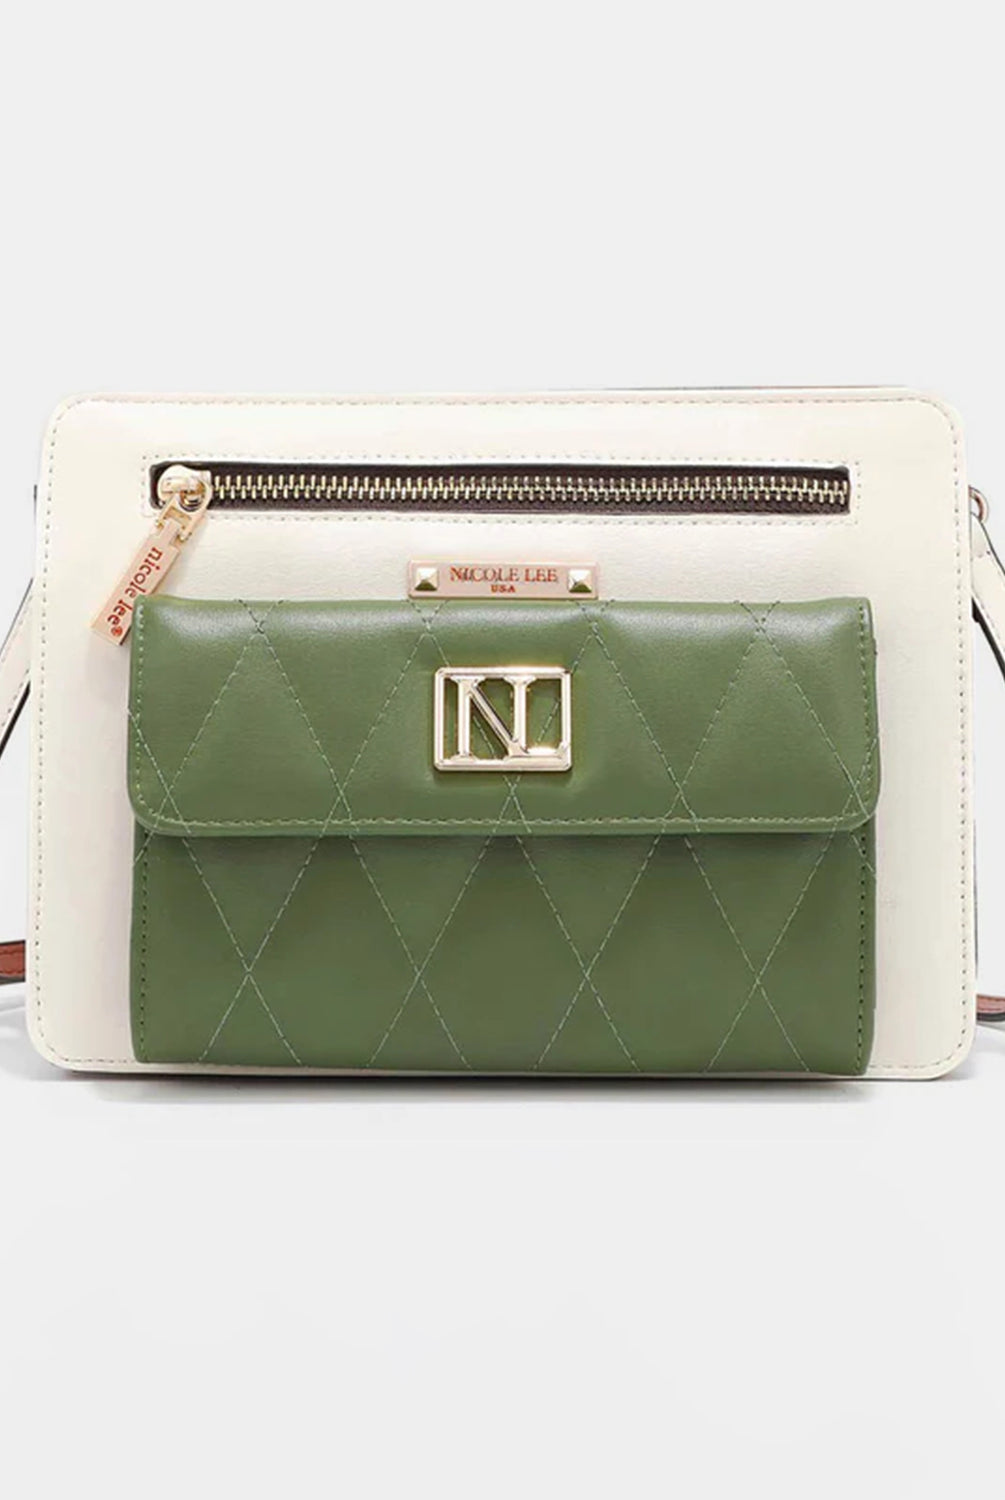 The green crossbody bag showcases a chic, quilted design with white accents, while the yellow version offers a bold, color-blocked look with pastel pink details.